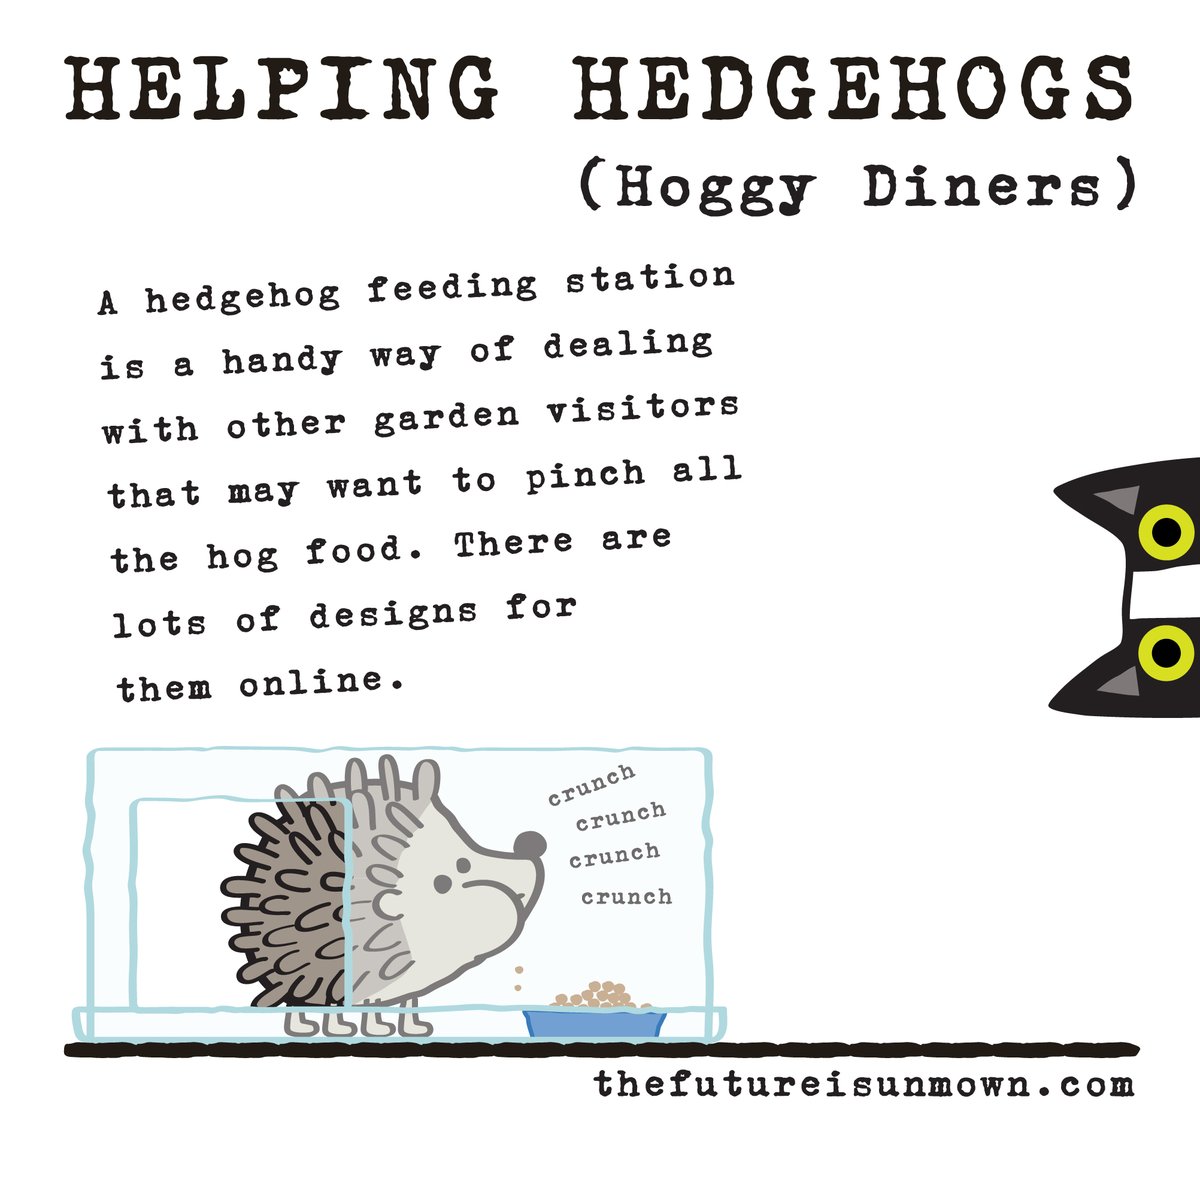 We now have four hungry #hedgehogs out of hibernation and hitting our all-you-can-eat #wildlife buffet every night 😁🦔💚

#HelpingHedghogs  #feedinghedgehogs #hedgehogdiner #hedgehogfeedingstation #wildlifegarden #nature #hedgehogrescue #hedgehoglove #thefutureisunmown